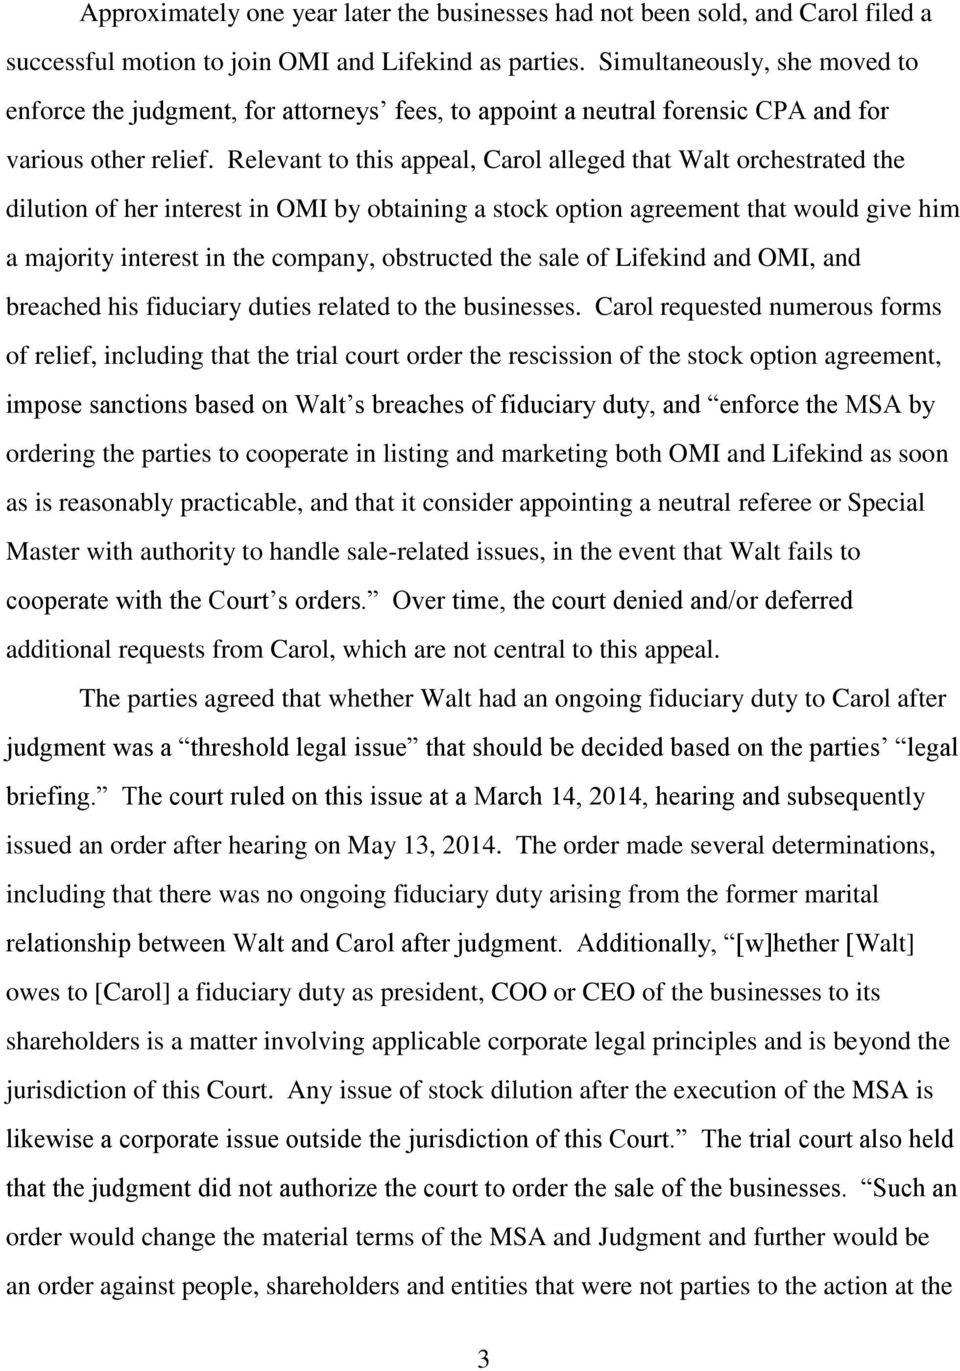 Relevant to this appeal, Carol alleged that Walt orchestrated the dilution of her interest in OMI by obtaining a stock option agreement that would give him a majority interest in the company,